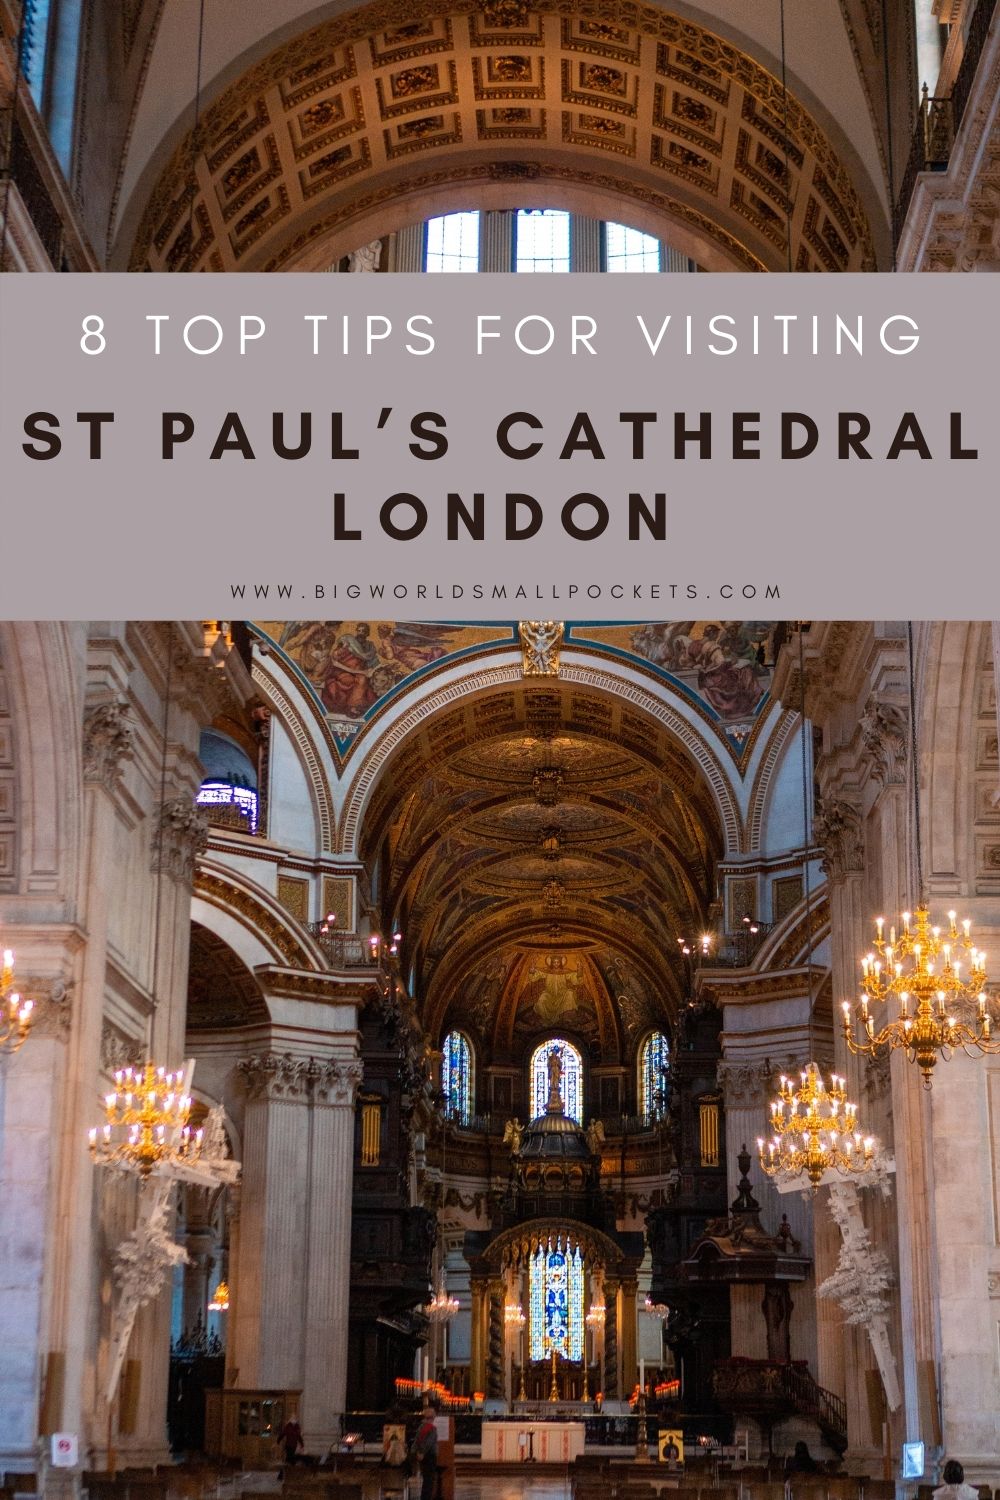 Best Tips for Visiting St Paul's Cathedral in London